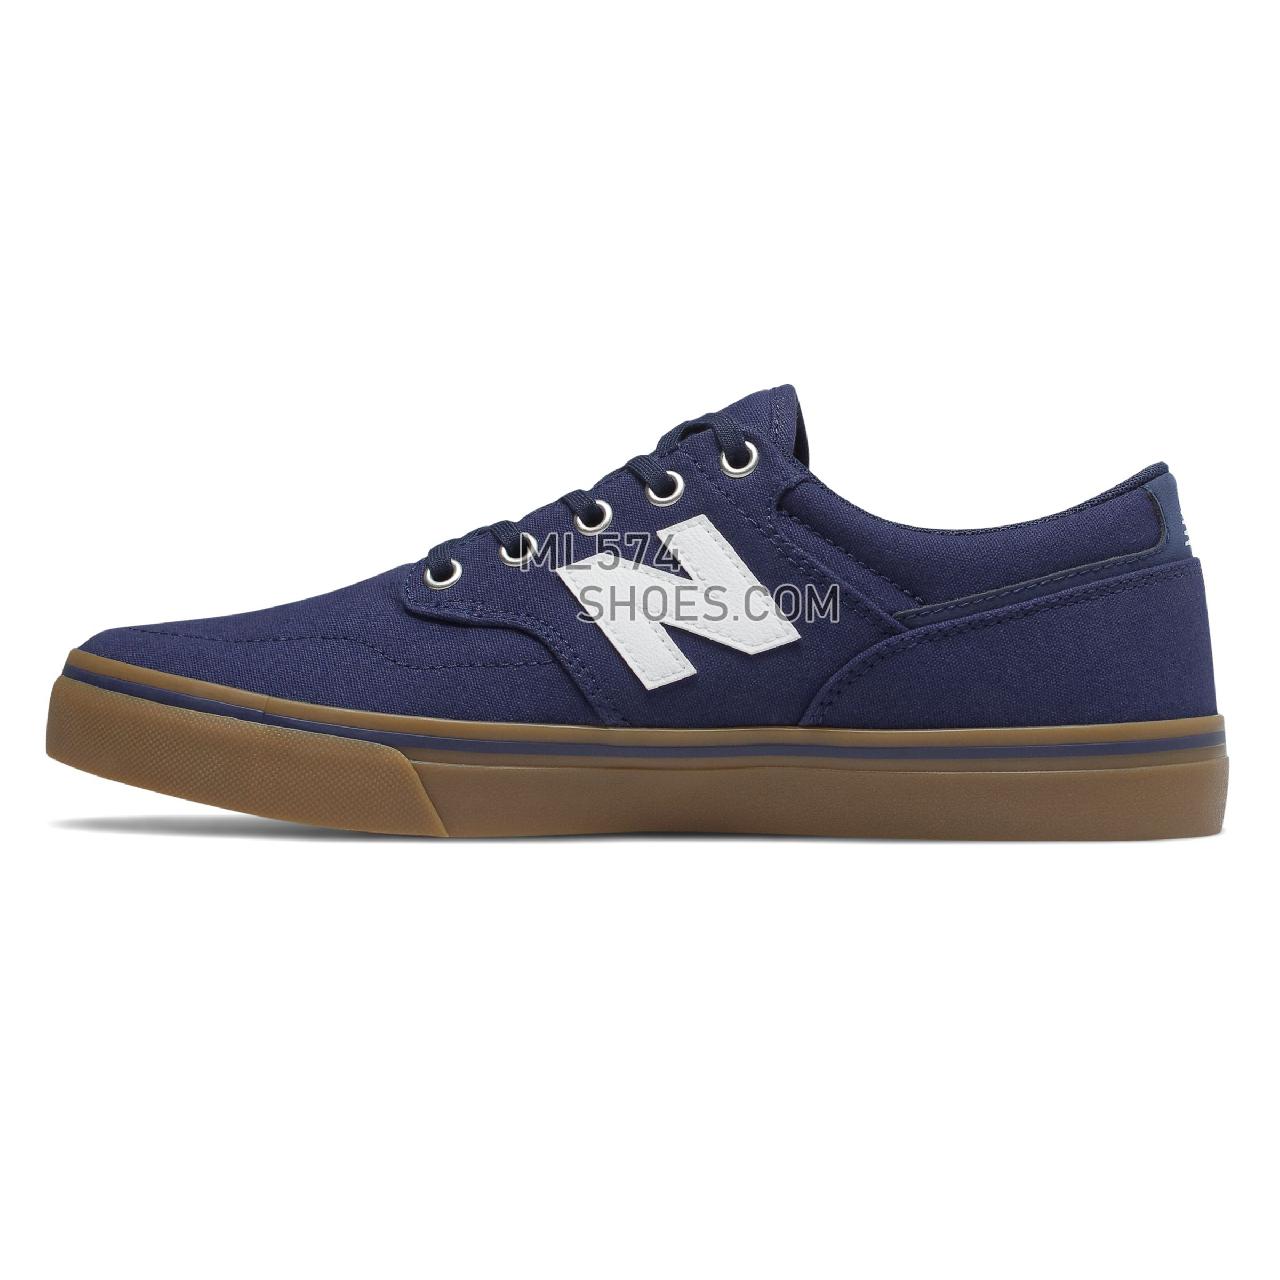 New Balance Numeric 331 - Men's 331 - Classic Navy with White - AM331NWB